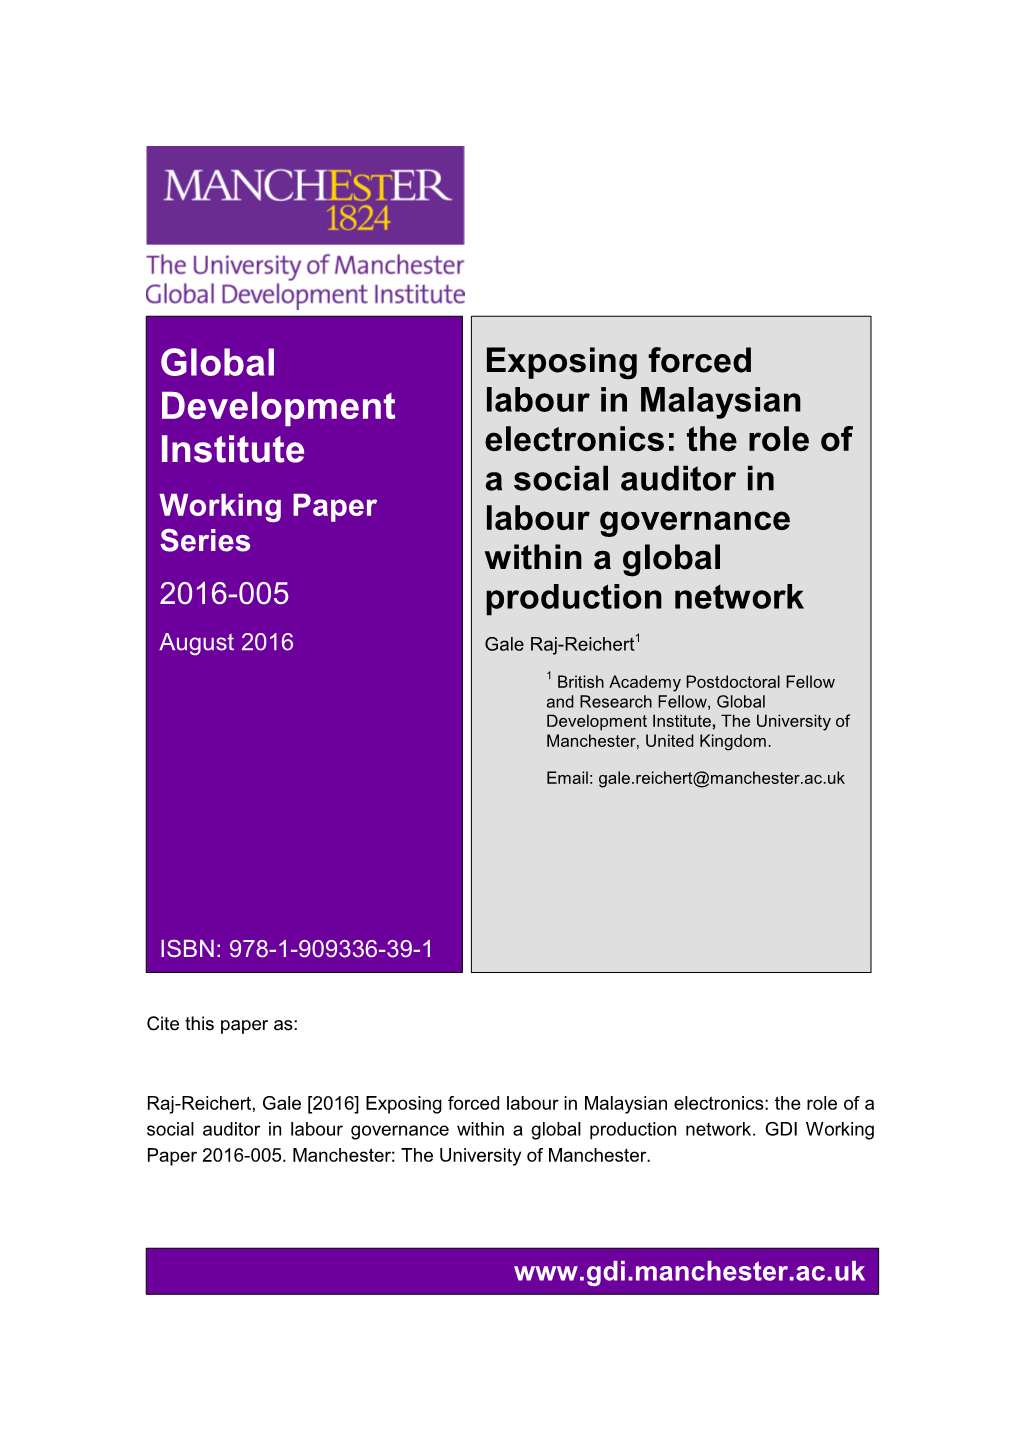 Exposing Forced Labour in Malaysian Electronics: the Role of a Social Auditor in Labour Governance Within a Global Production Network